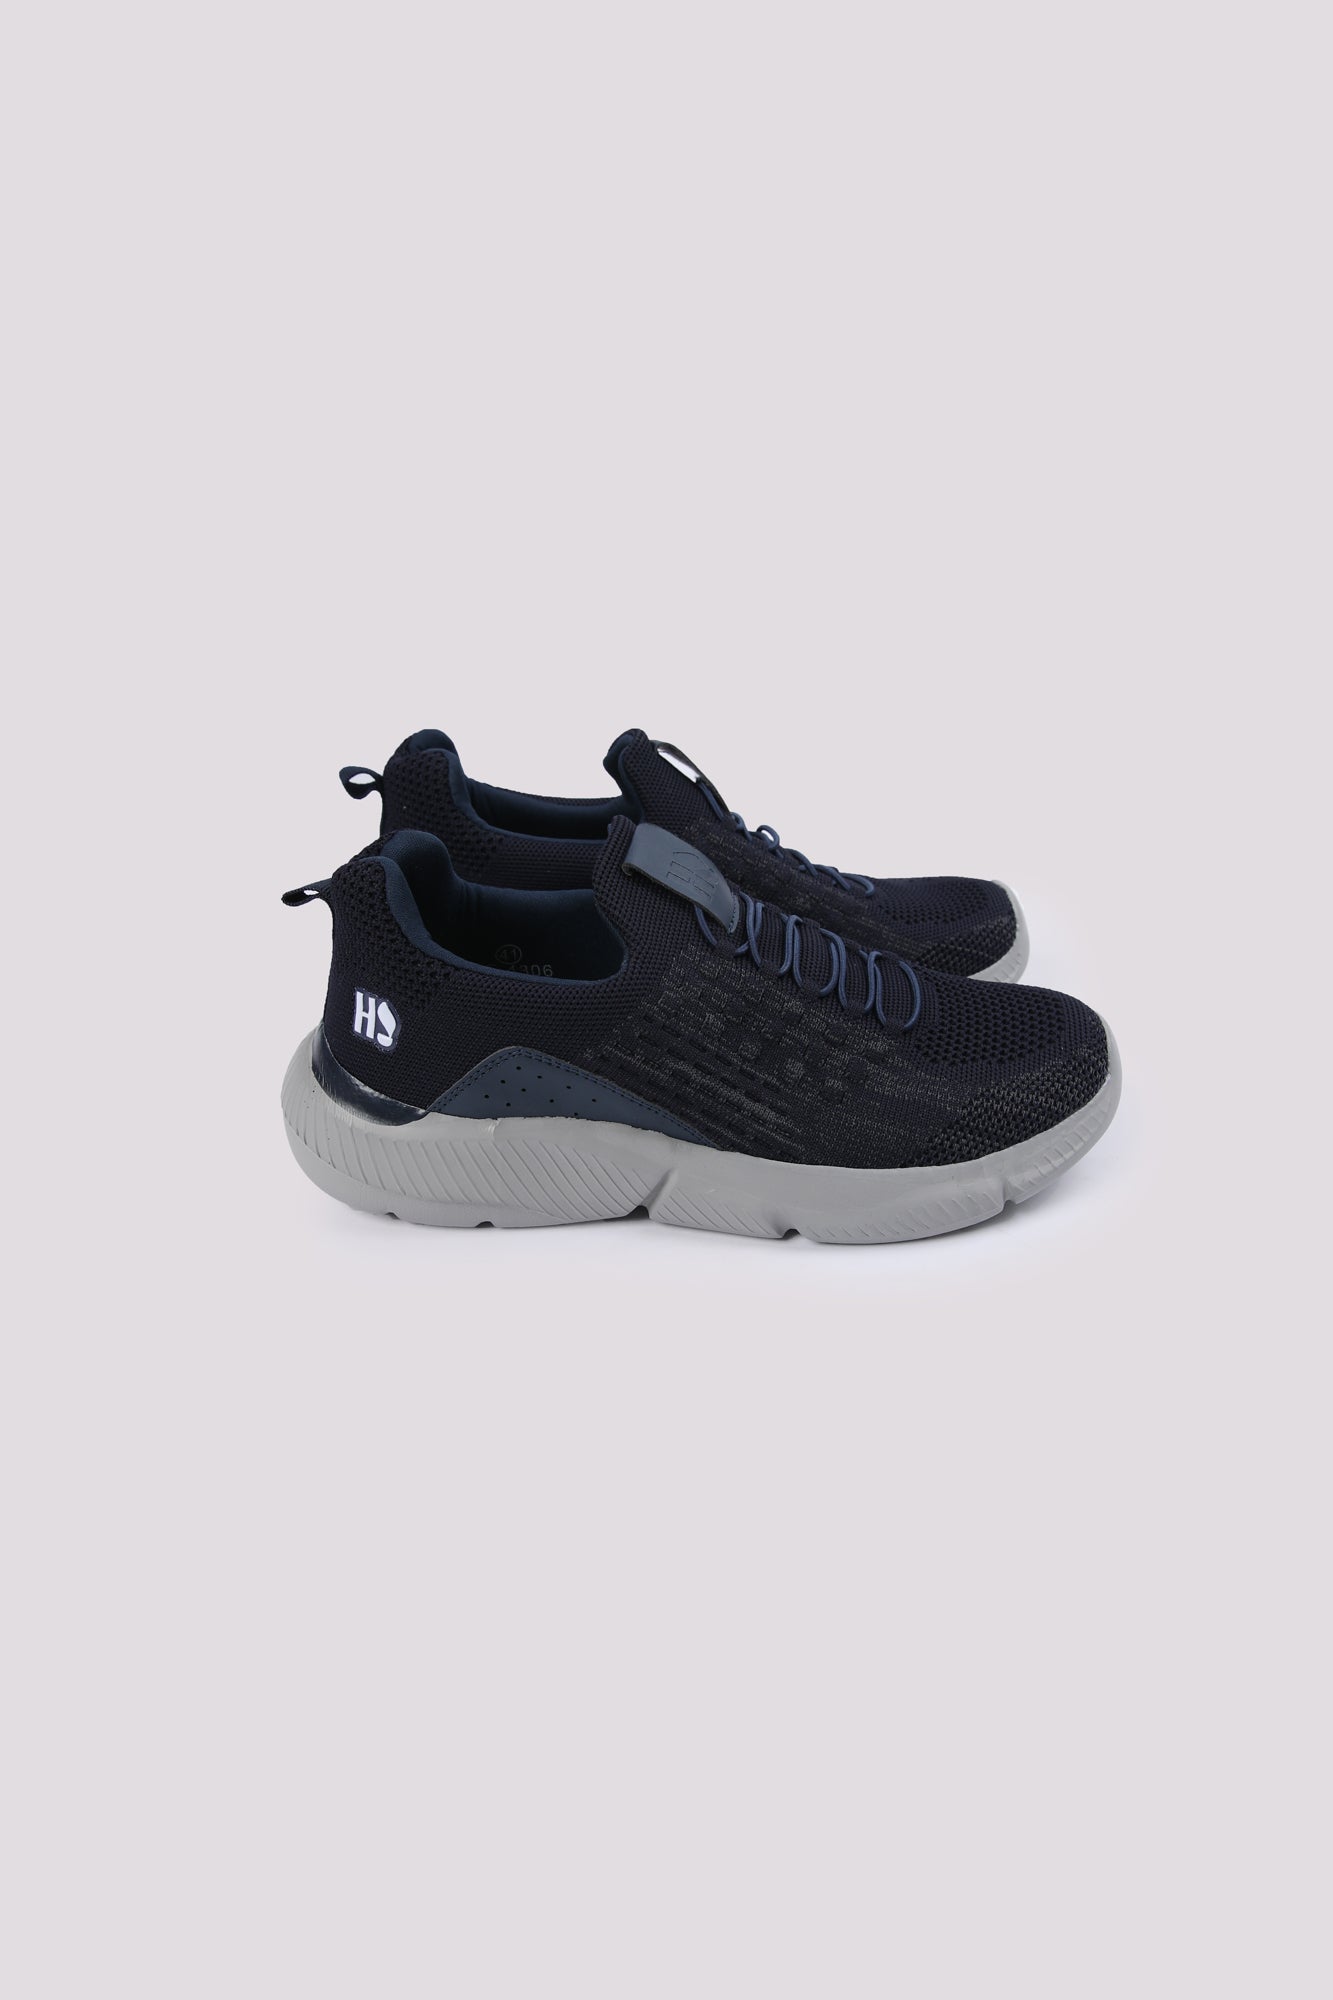 Lace up Comfort Trainer